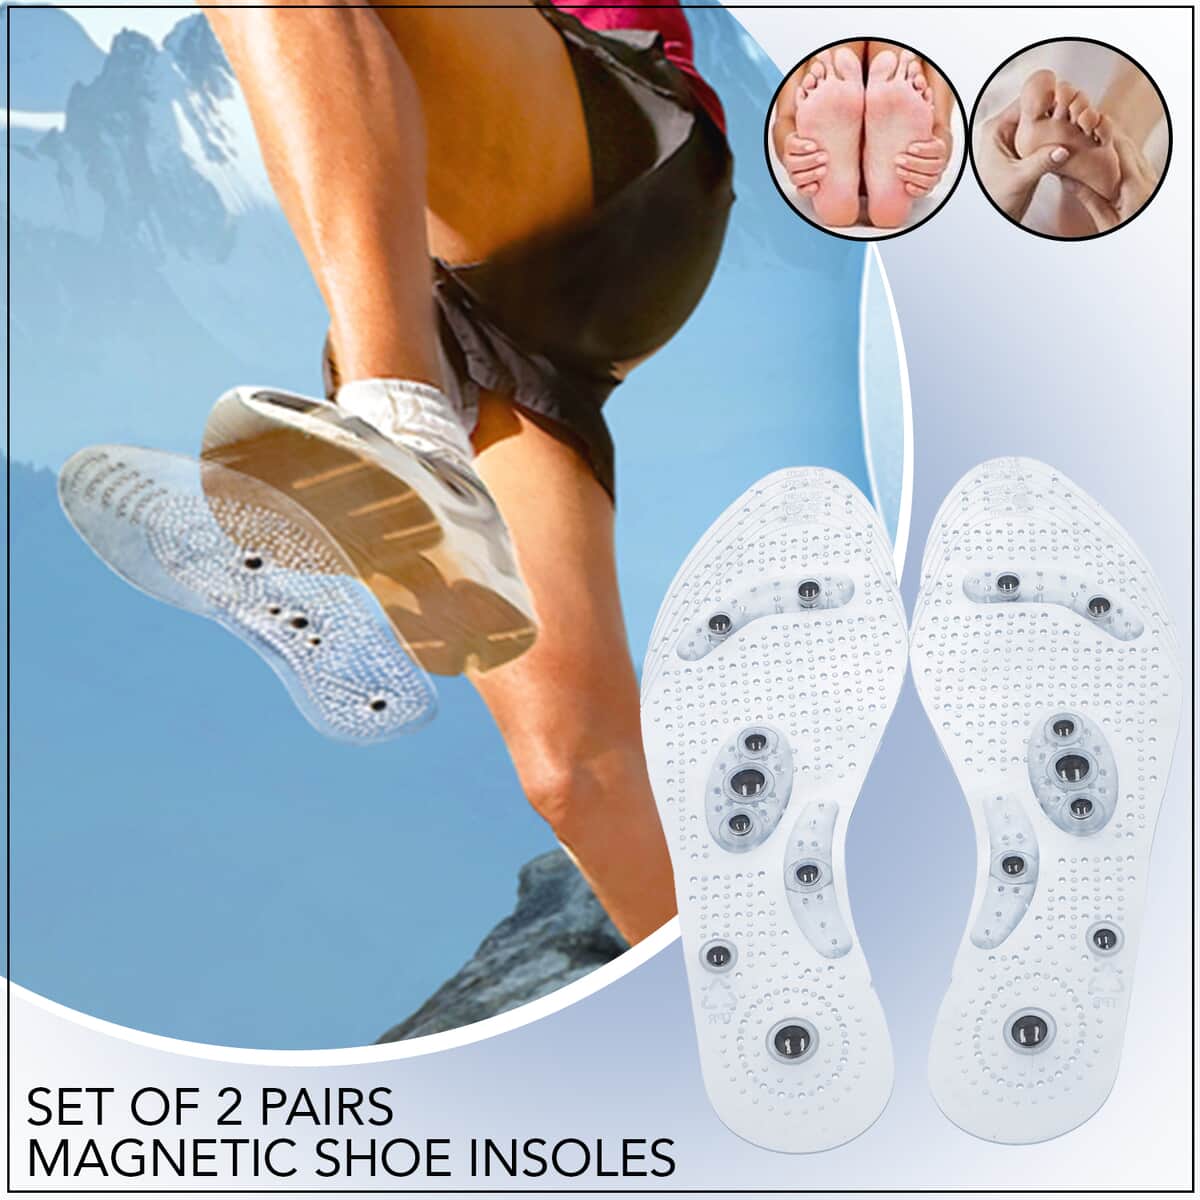 Set of 2 Pairs Magnetic Shoe Insoles - Black and Clear image number 1